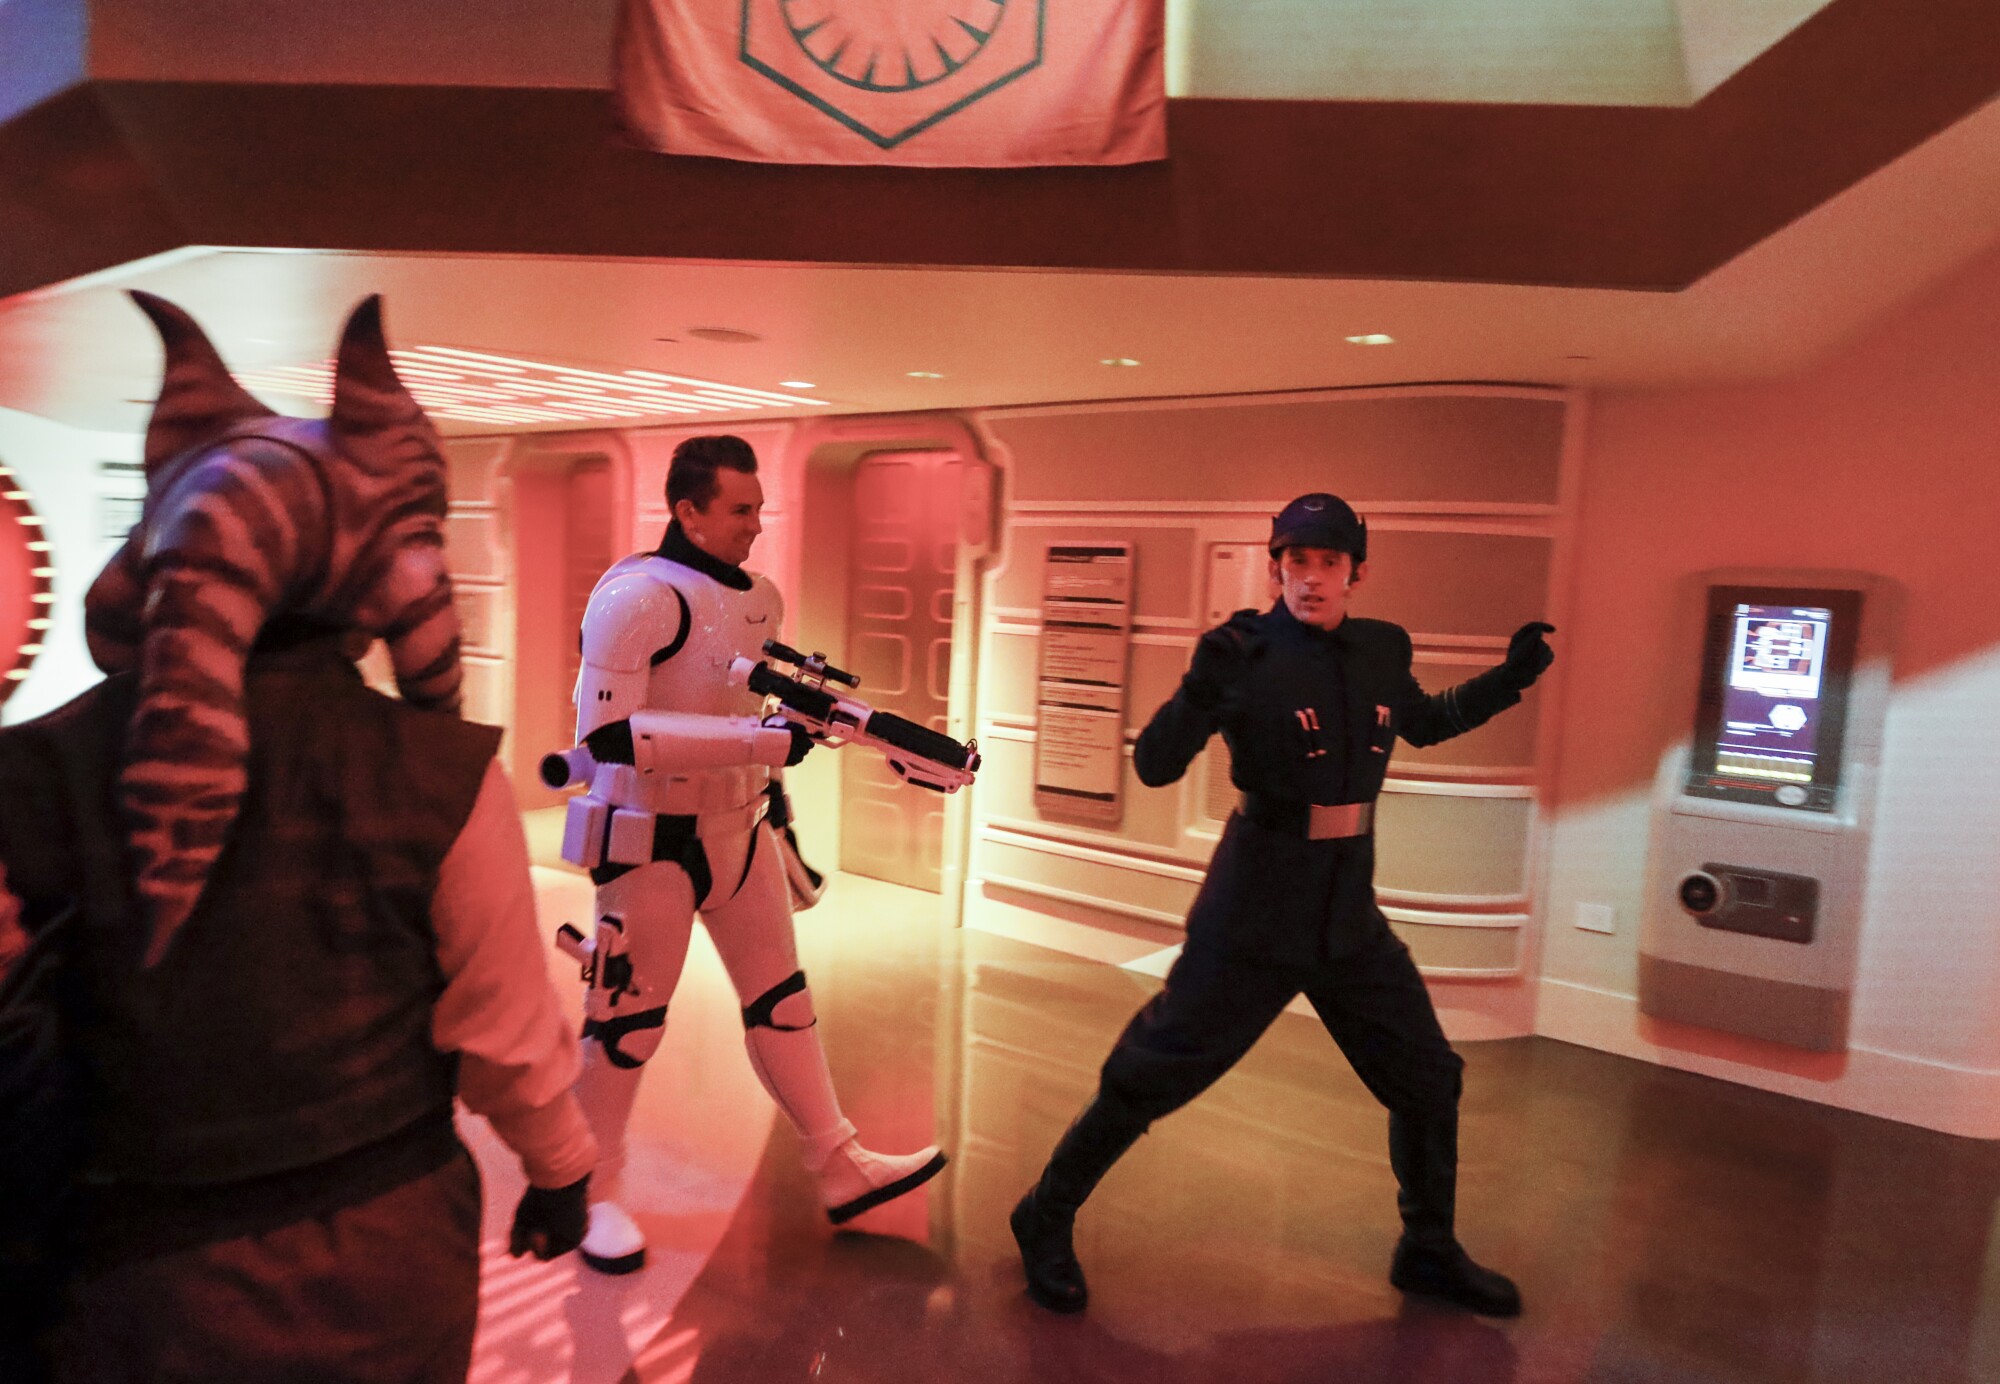 Sammie, the ship's mechanic, left, leads the First Order commander to the brig.